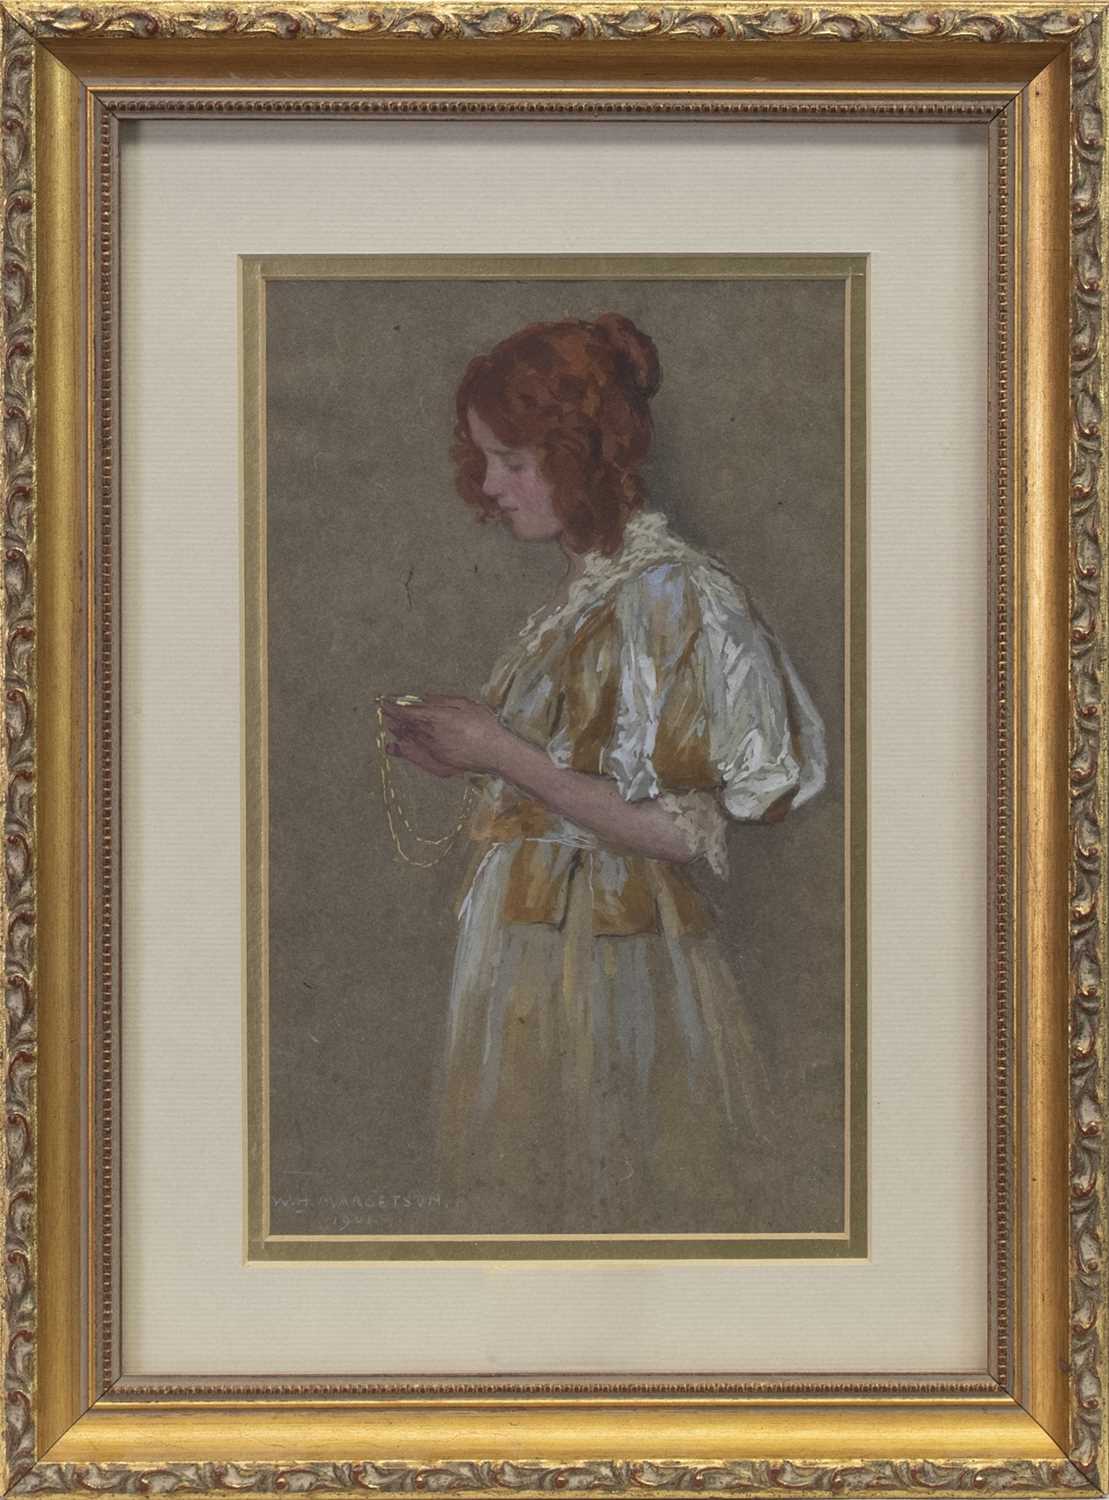 Lot 83 - THE LOCKET, A WATERCOLOUR BY WILLIAM HENRY MARGETSON